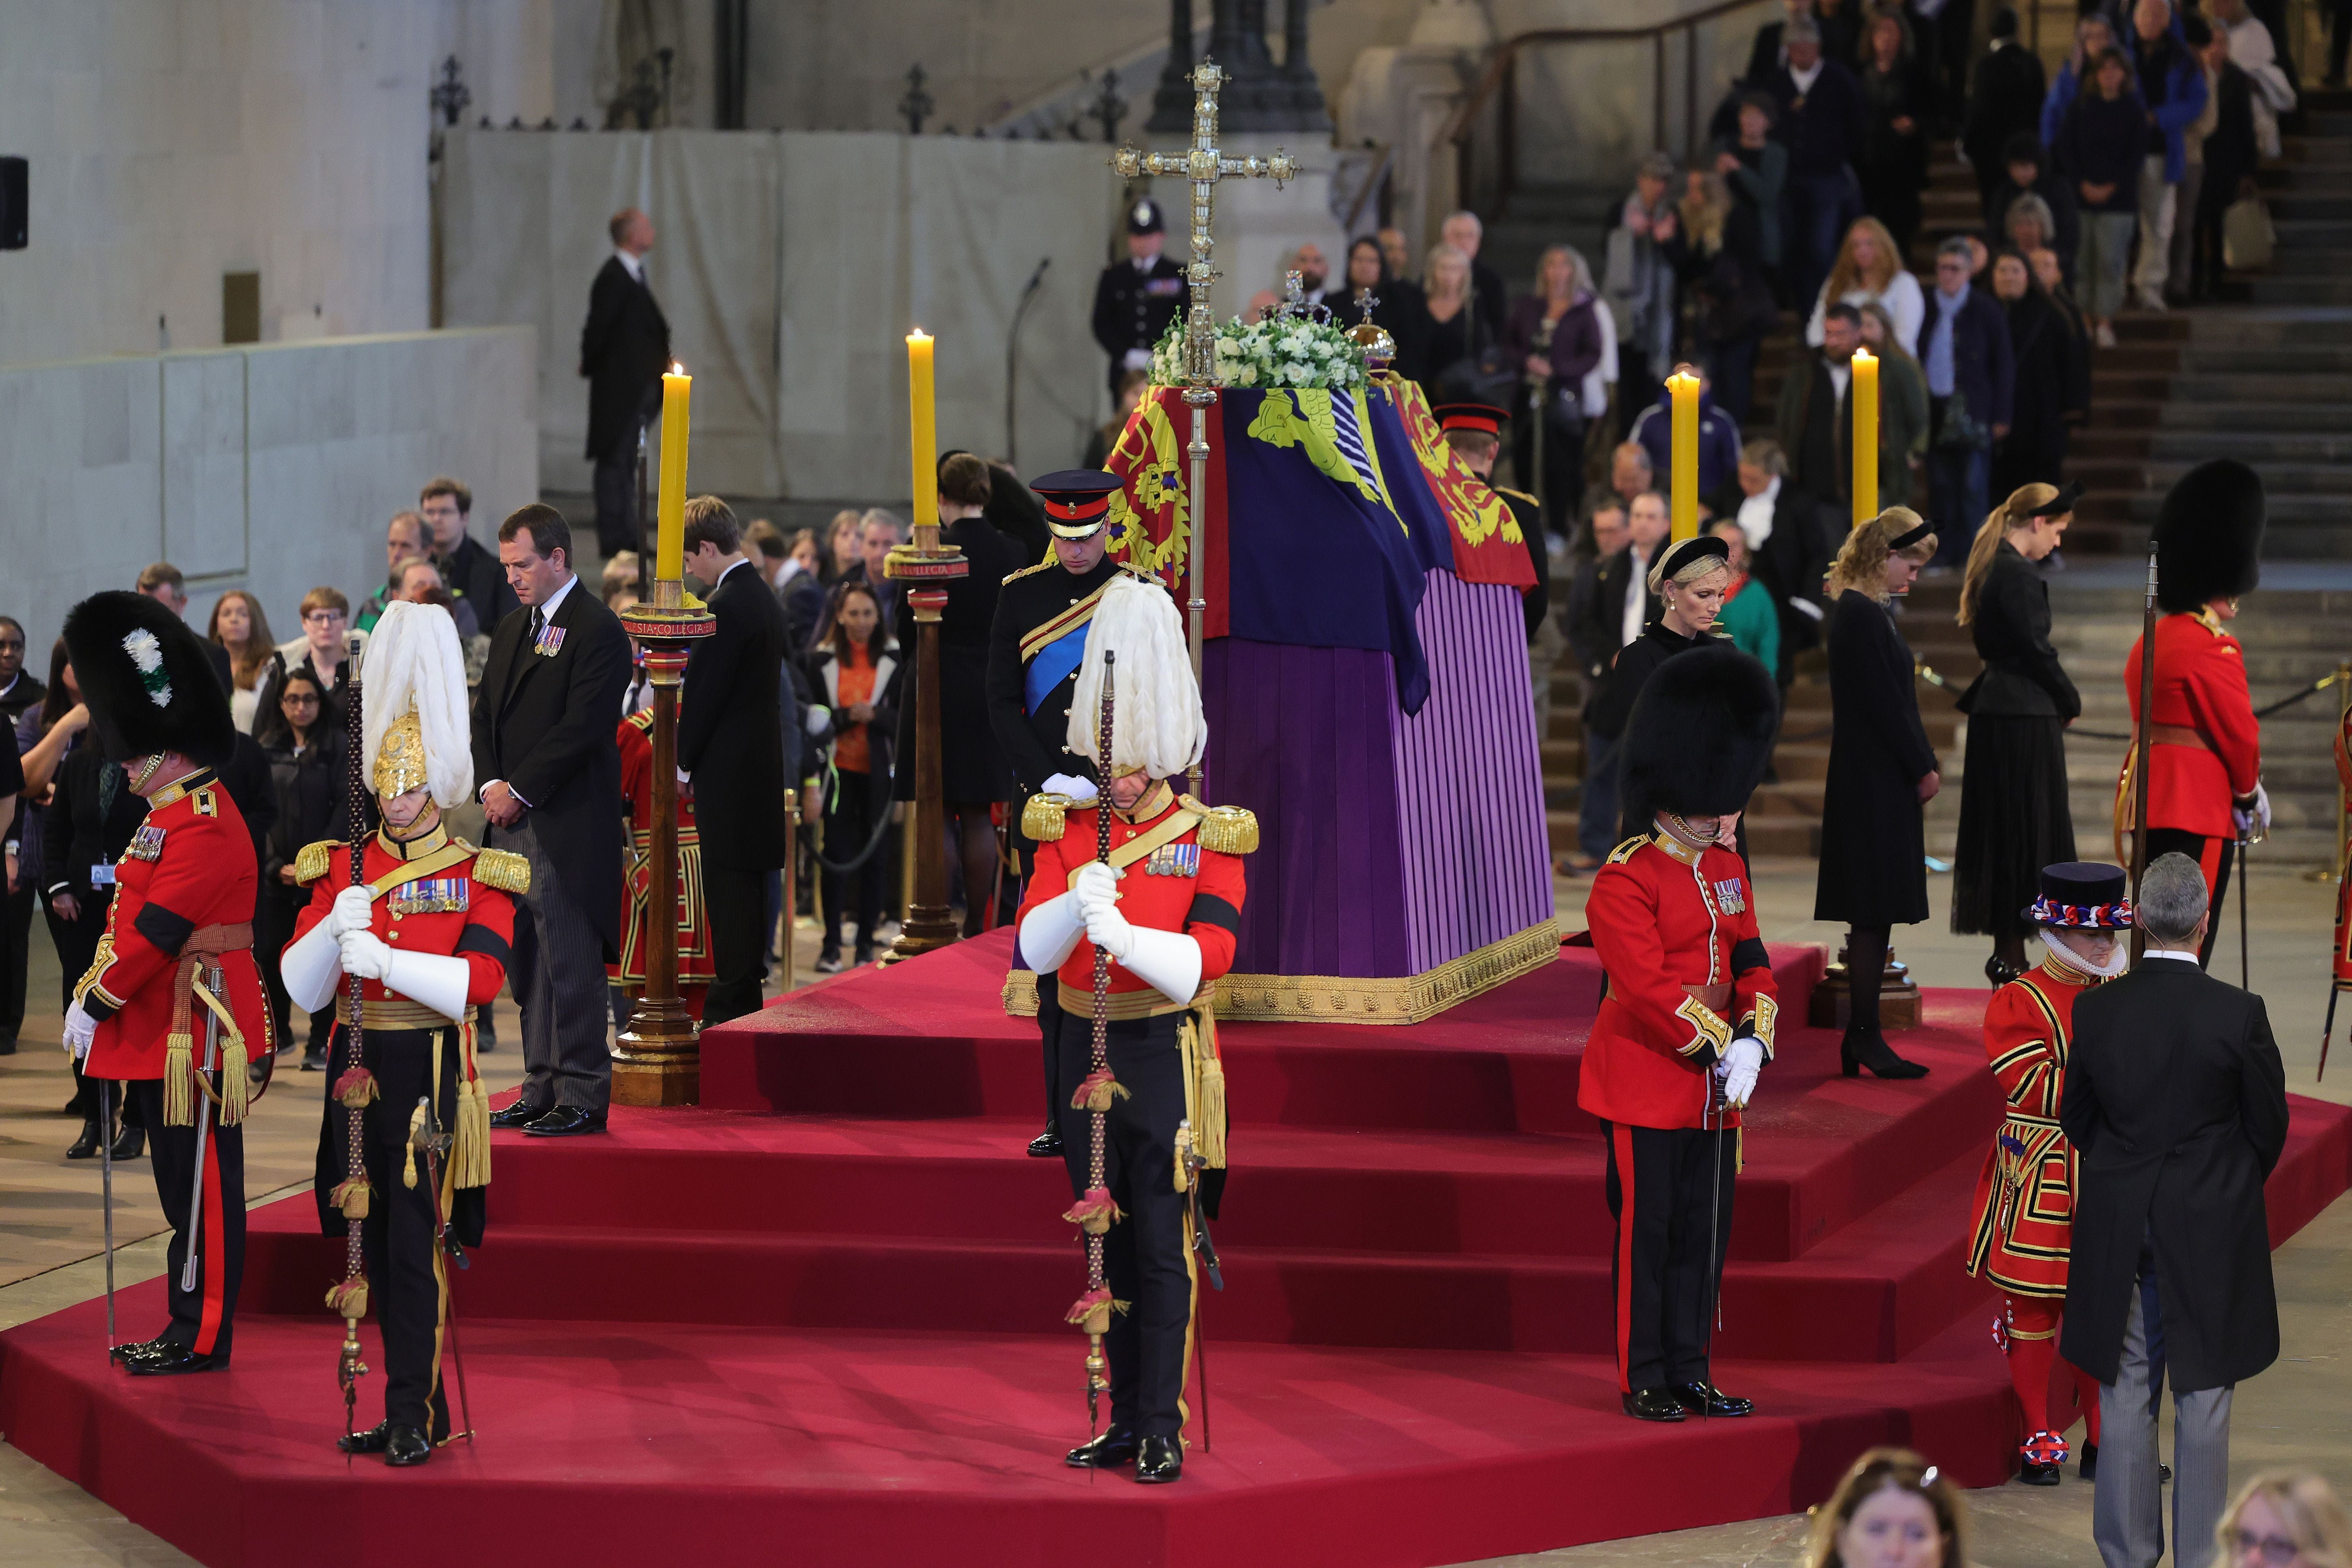 The Queen’s grandchildren mounted a vigil around her coffin as she lay in state at Westminster Hall (Chris Jackson/PA)